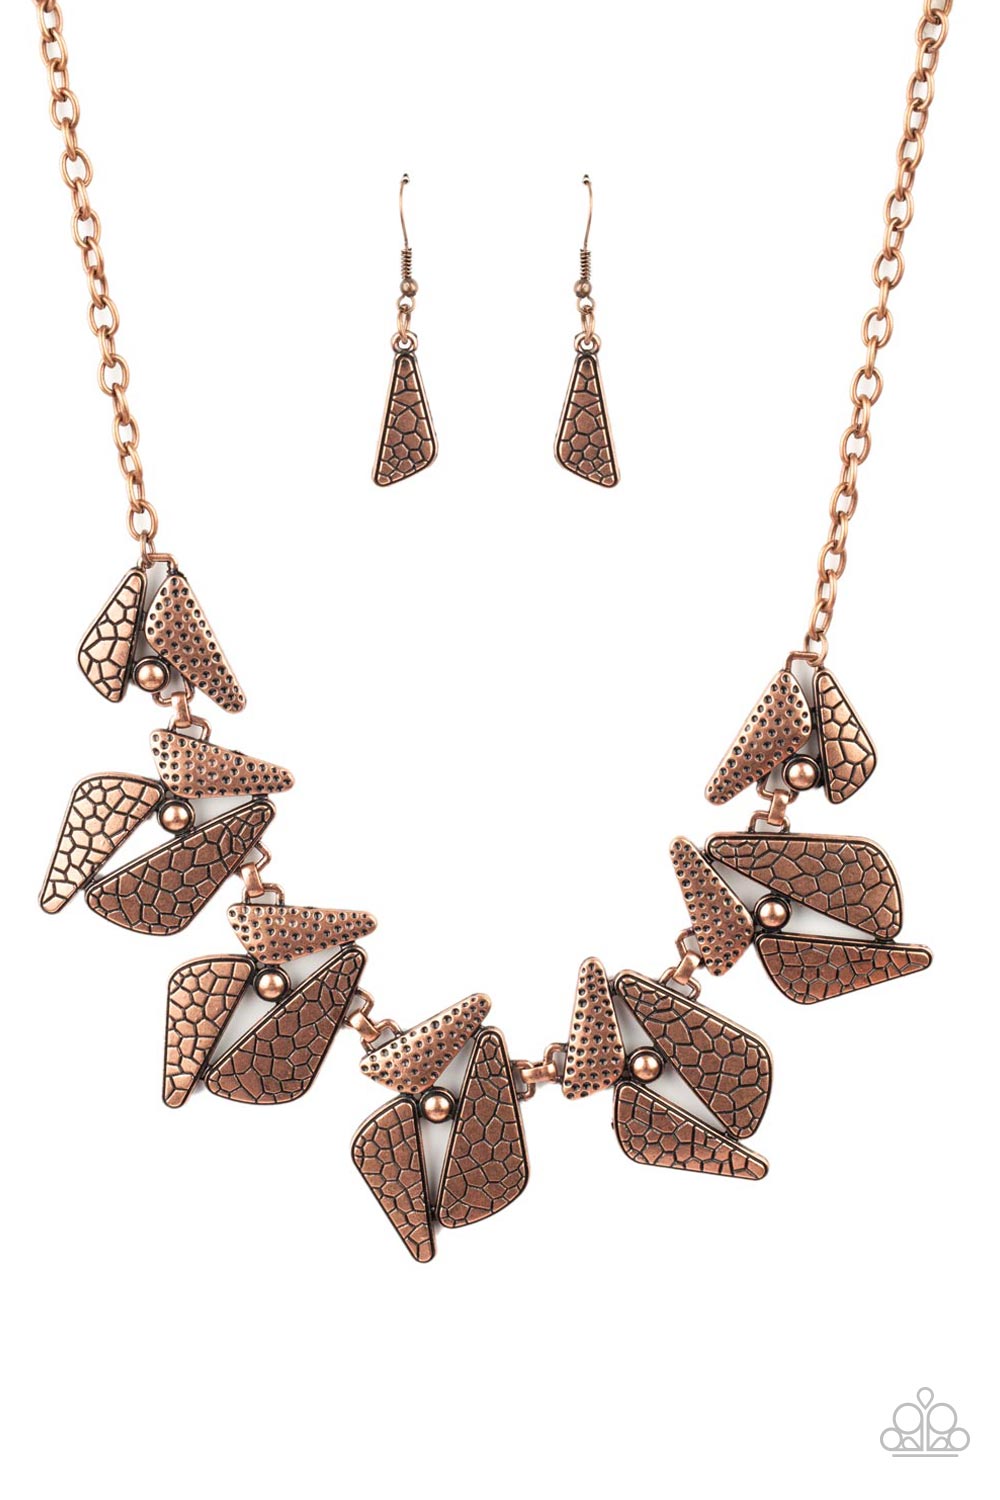 Extra Expedition - Copper necklace C024B